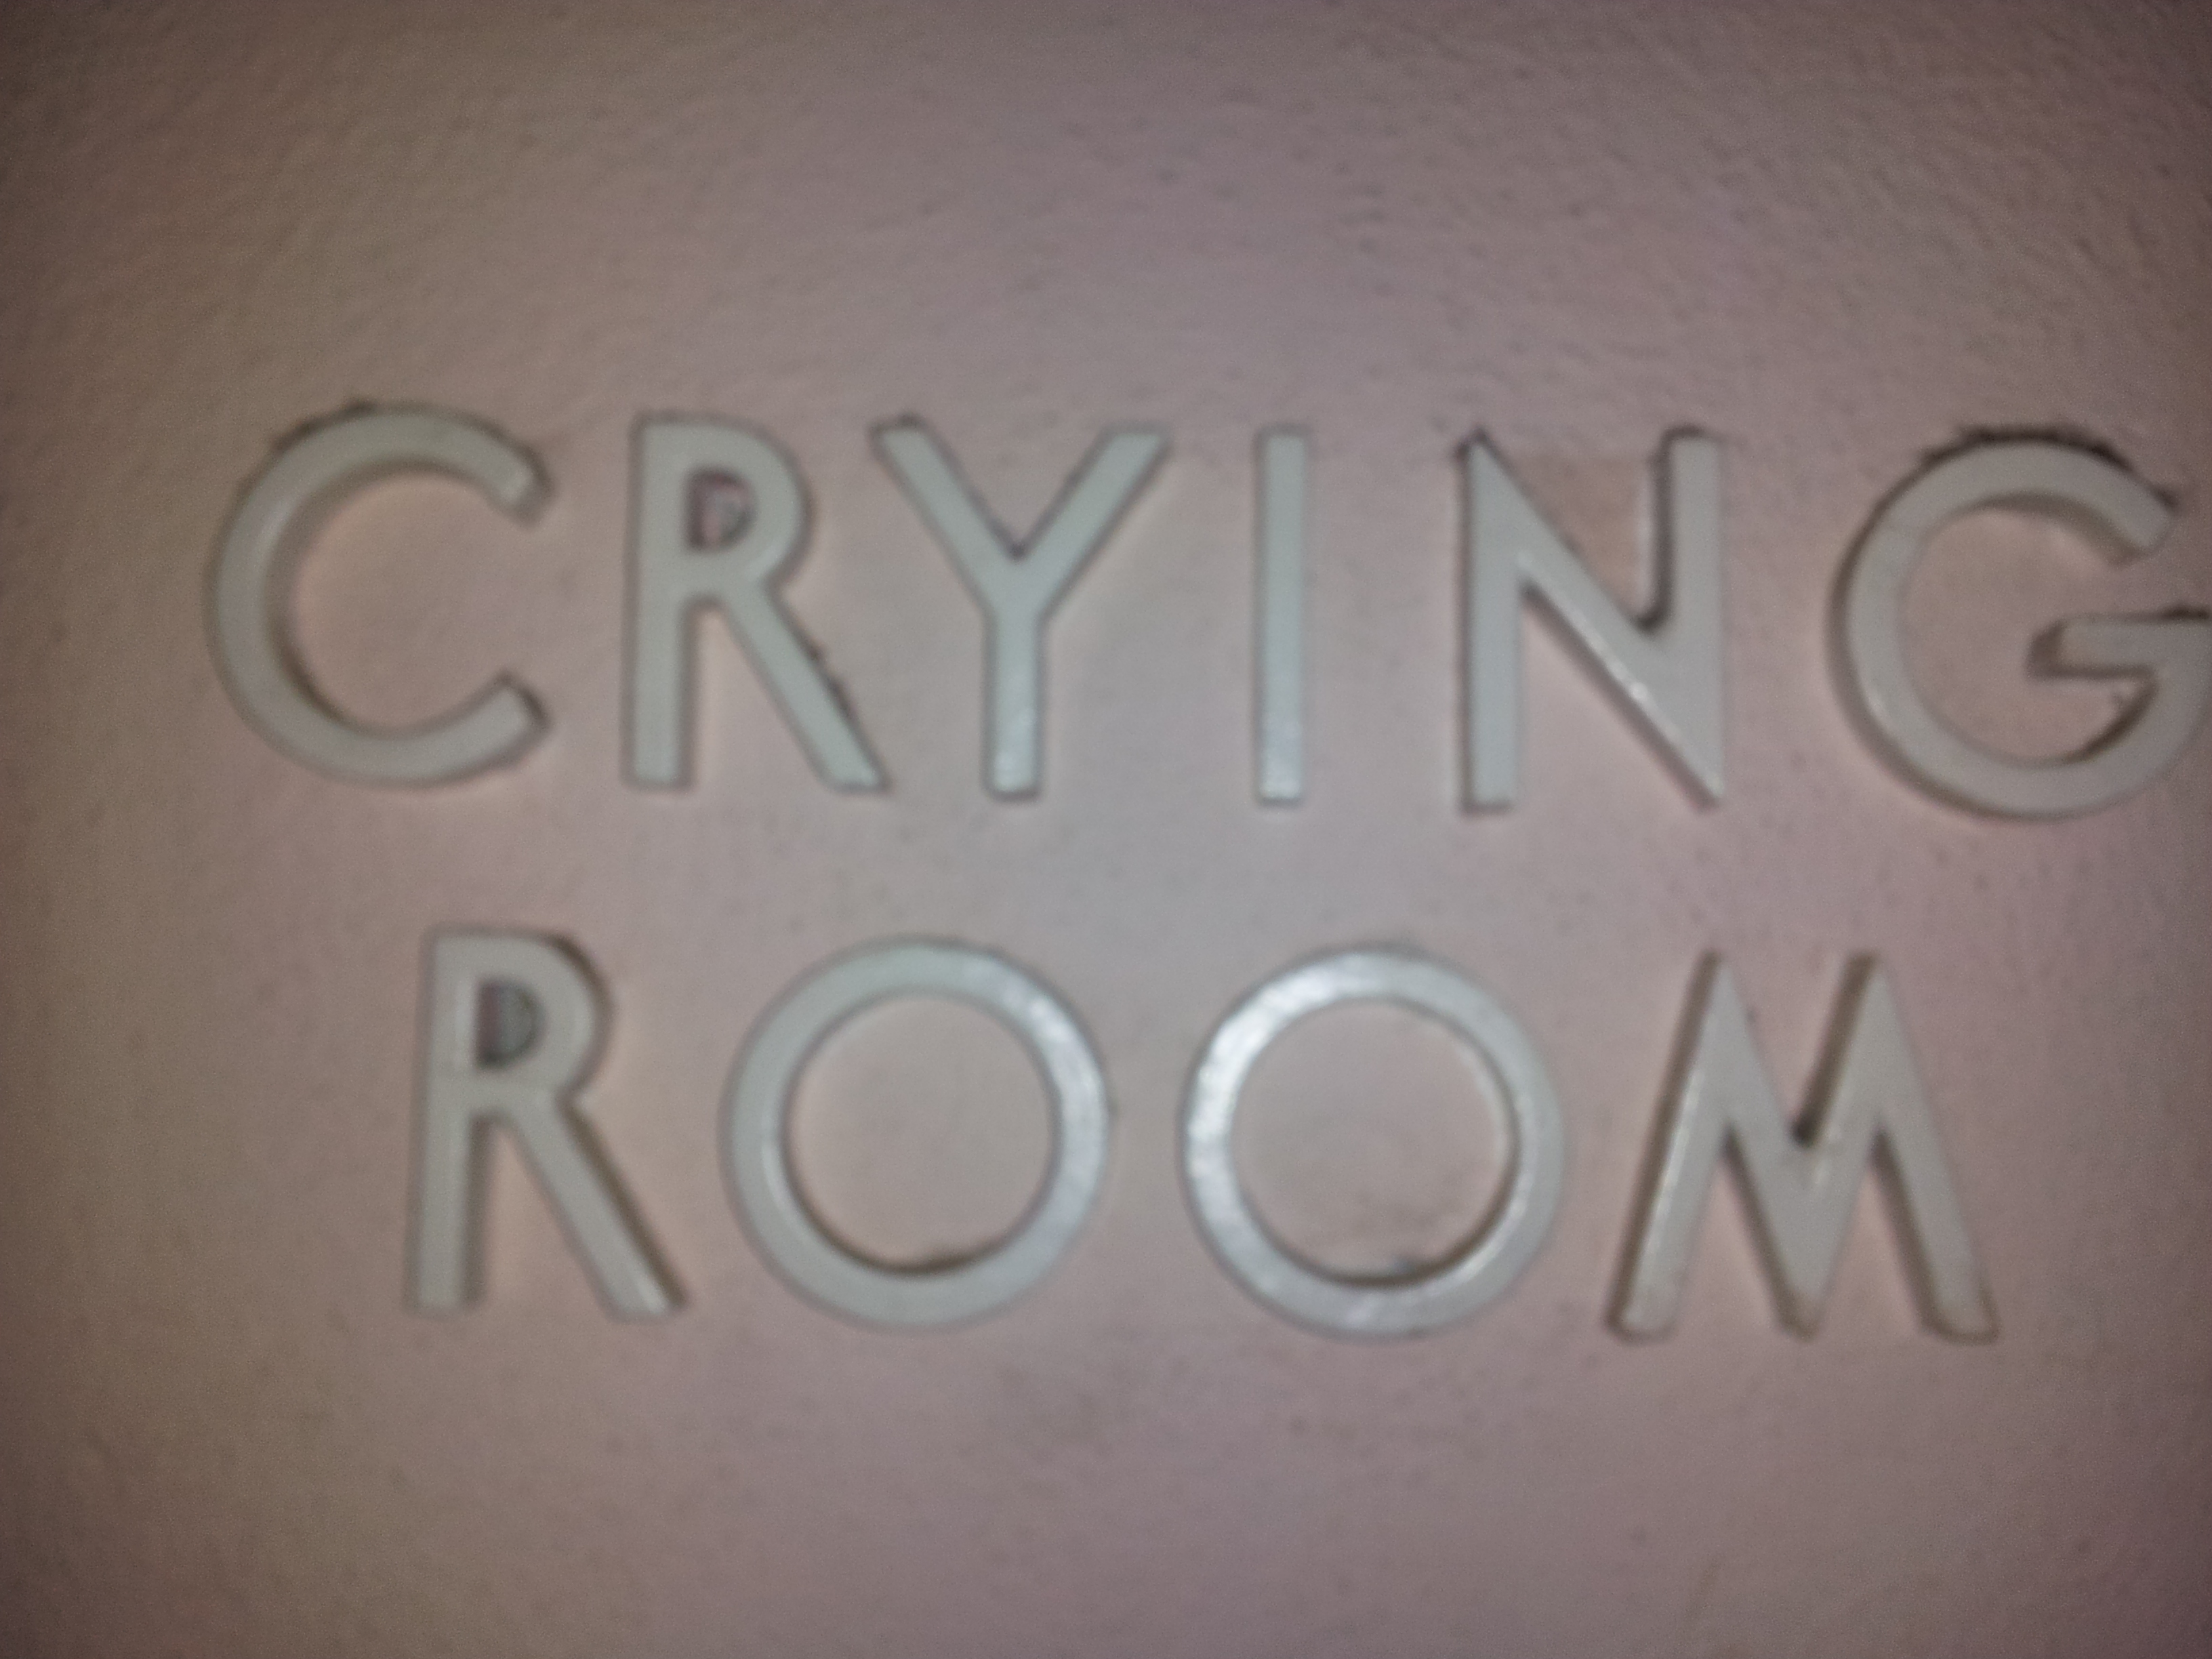 White letters reading "crying room"